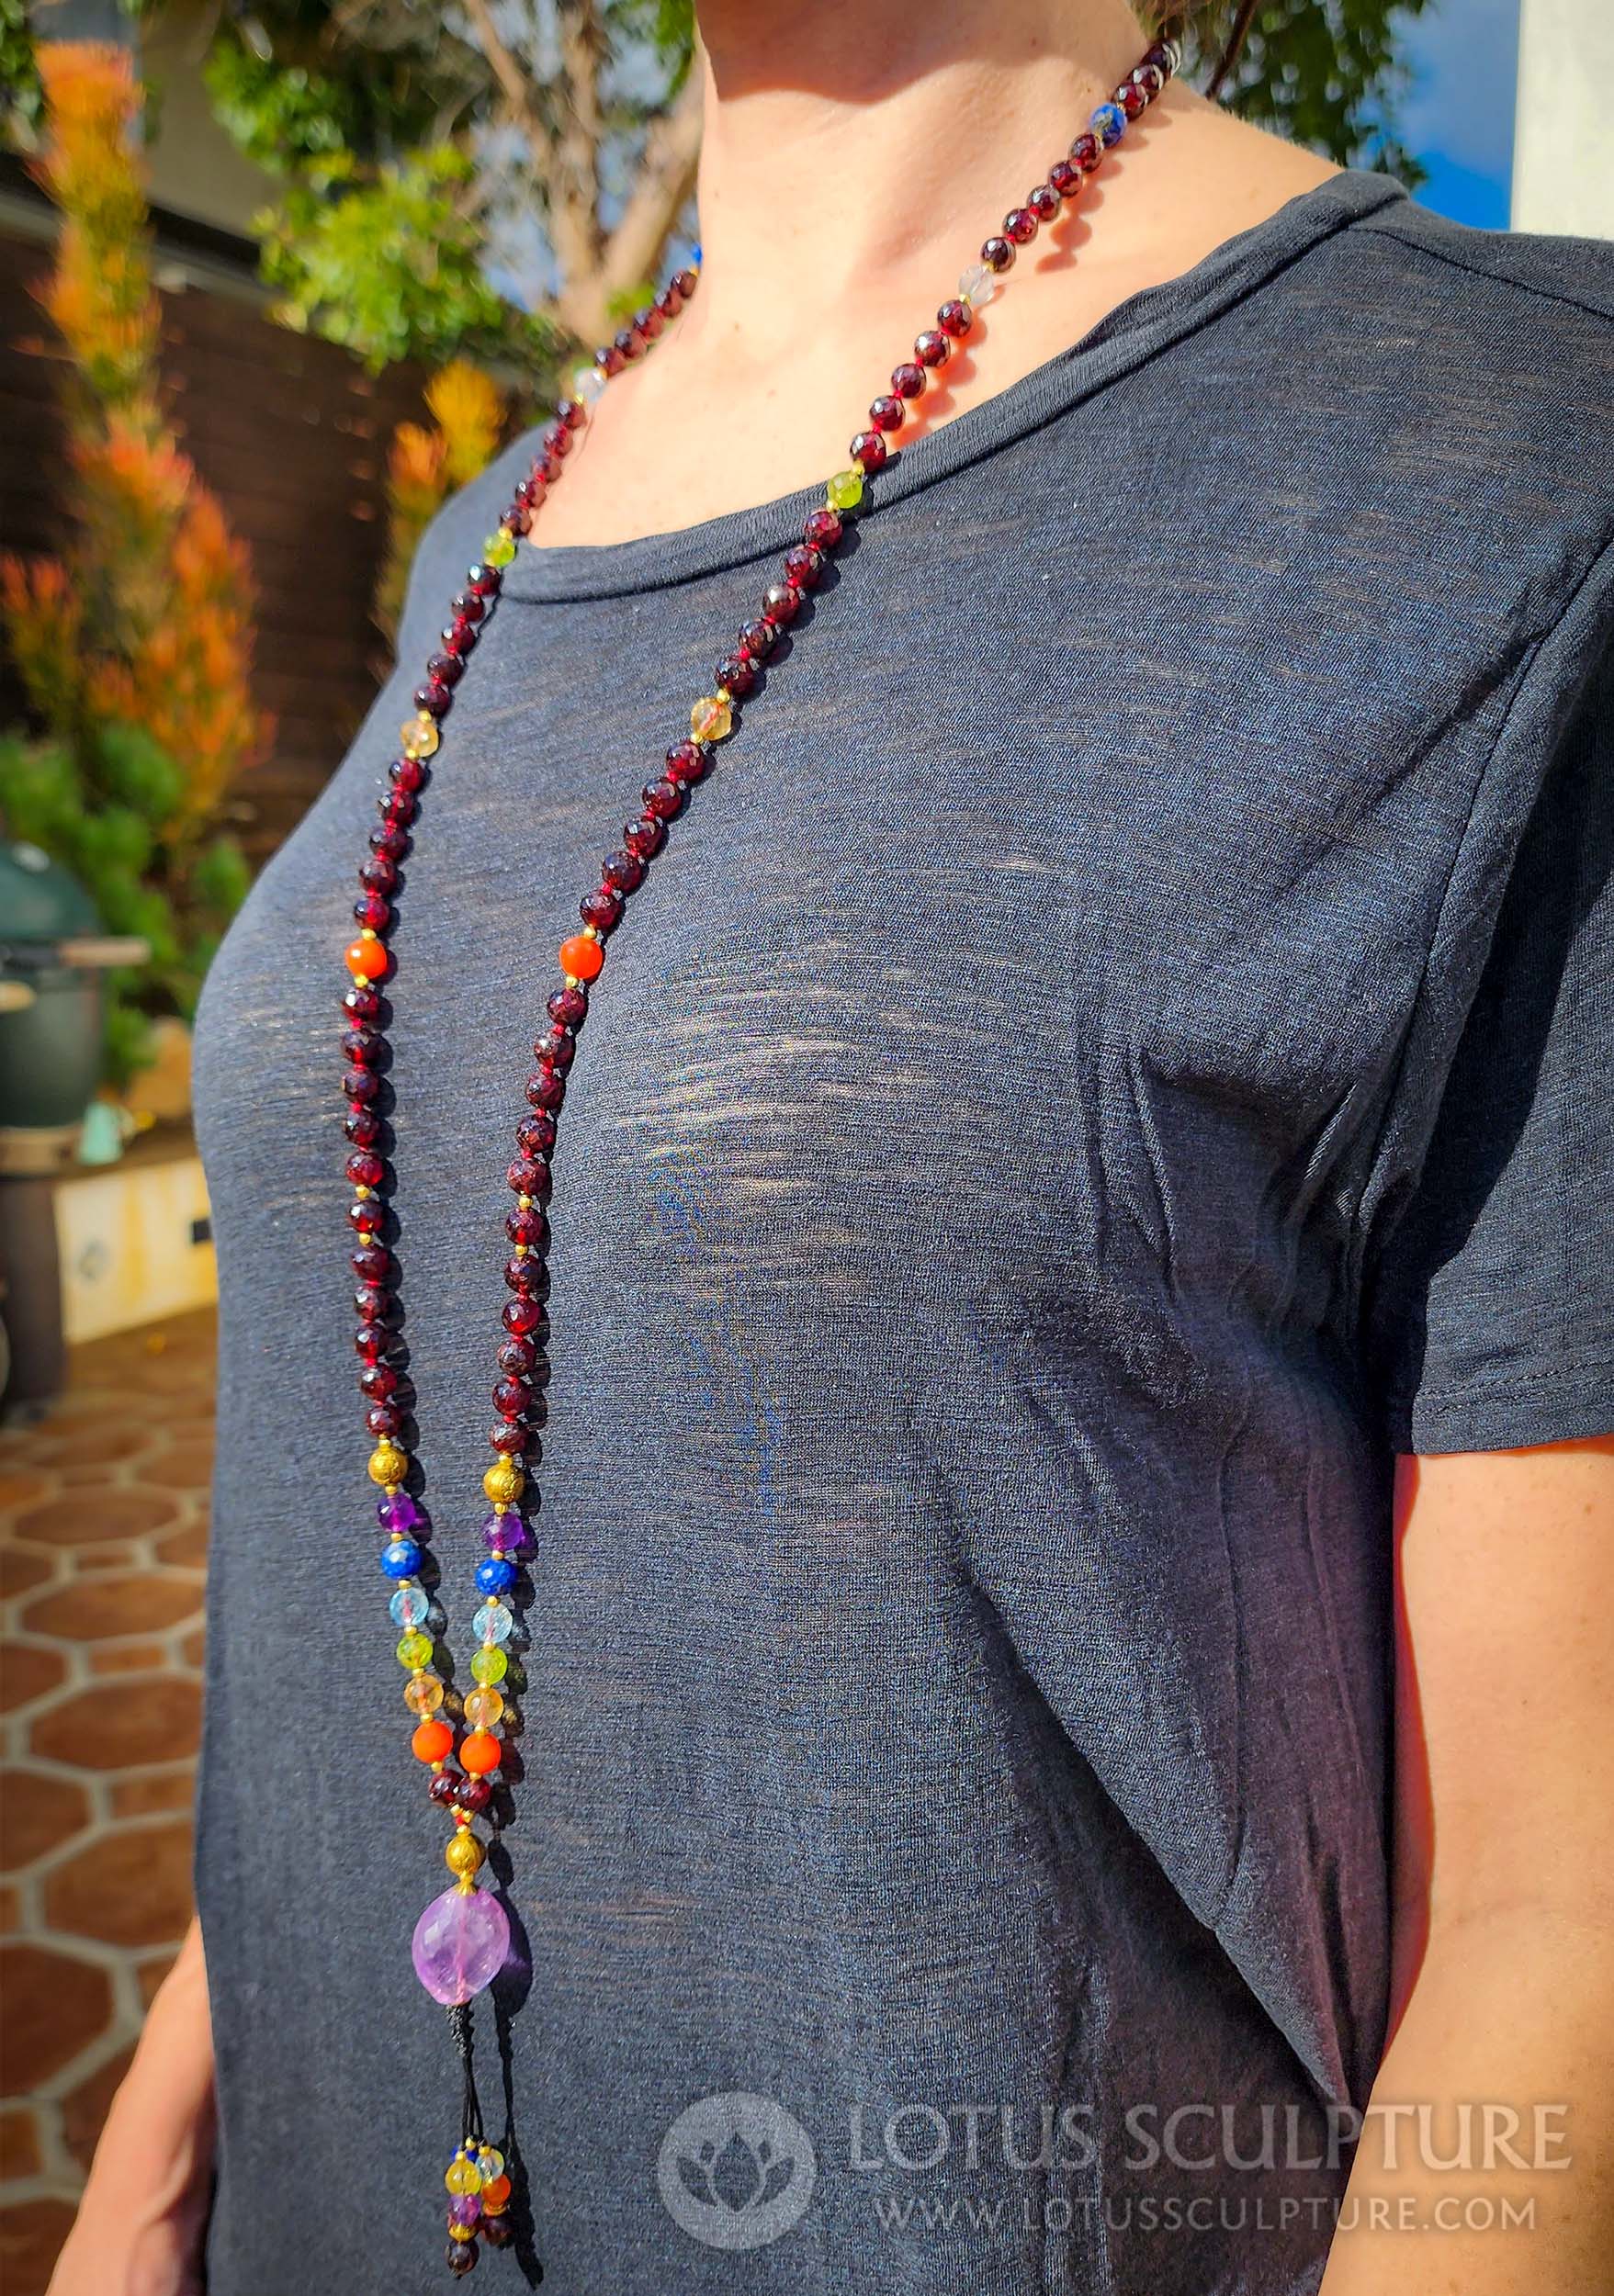 Garnet Mala Necklace with 108 Beads, Seven Chakra Stones Associated with Lord Buddha 22 by Lotus Sculpture